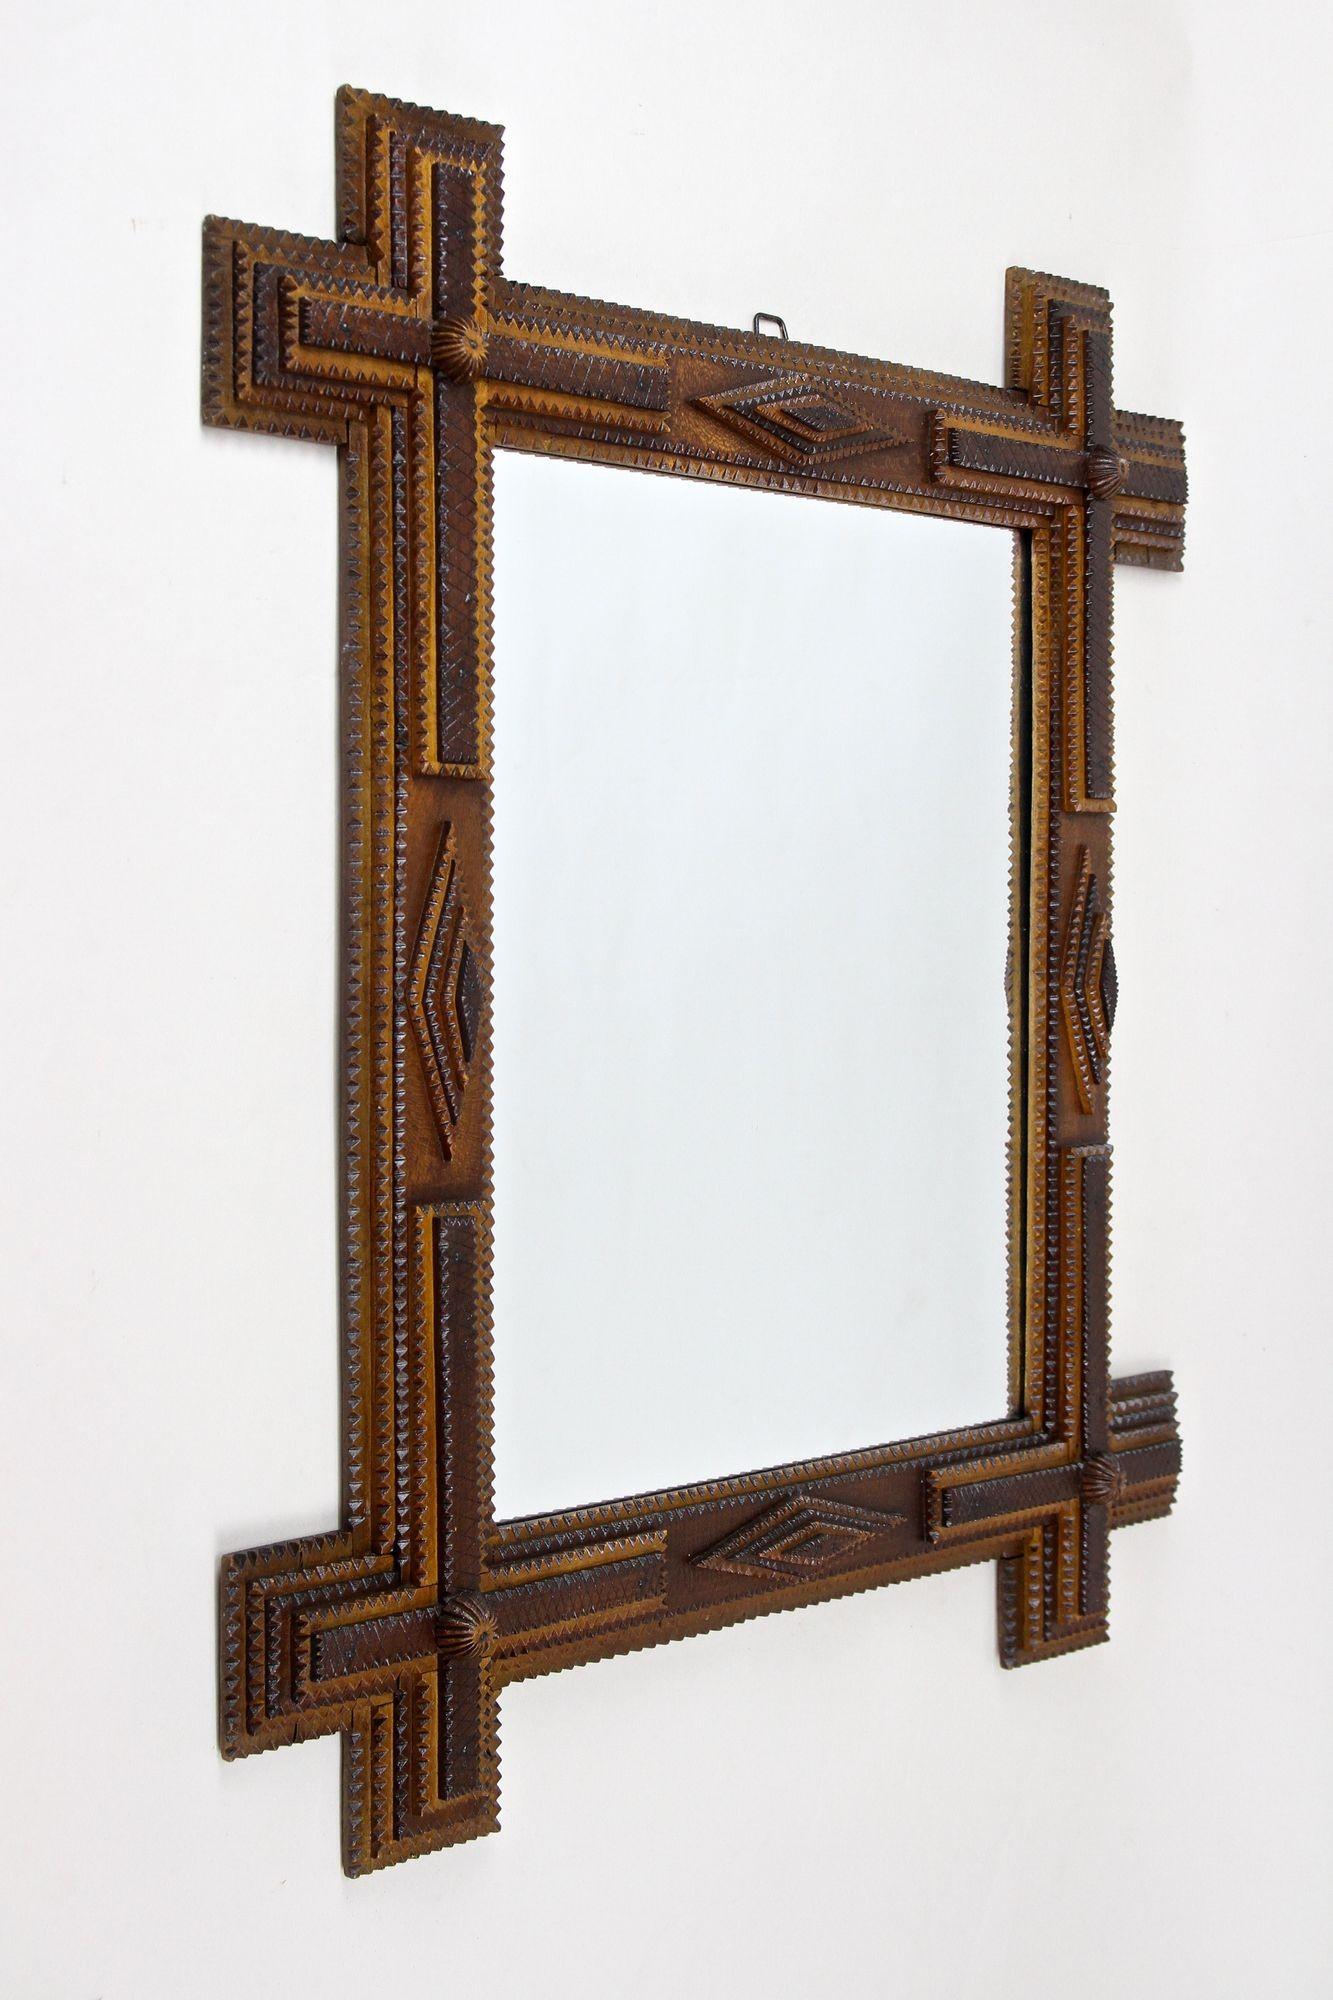 Exceptional looking rustic Tramp Art wall mirror from the late 19th century around 1890 in Austria. This very special crafted, elaborately made rural wall mirror impresses with its fantastic variety of different elements: chip carved 